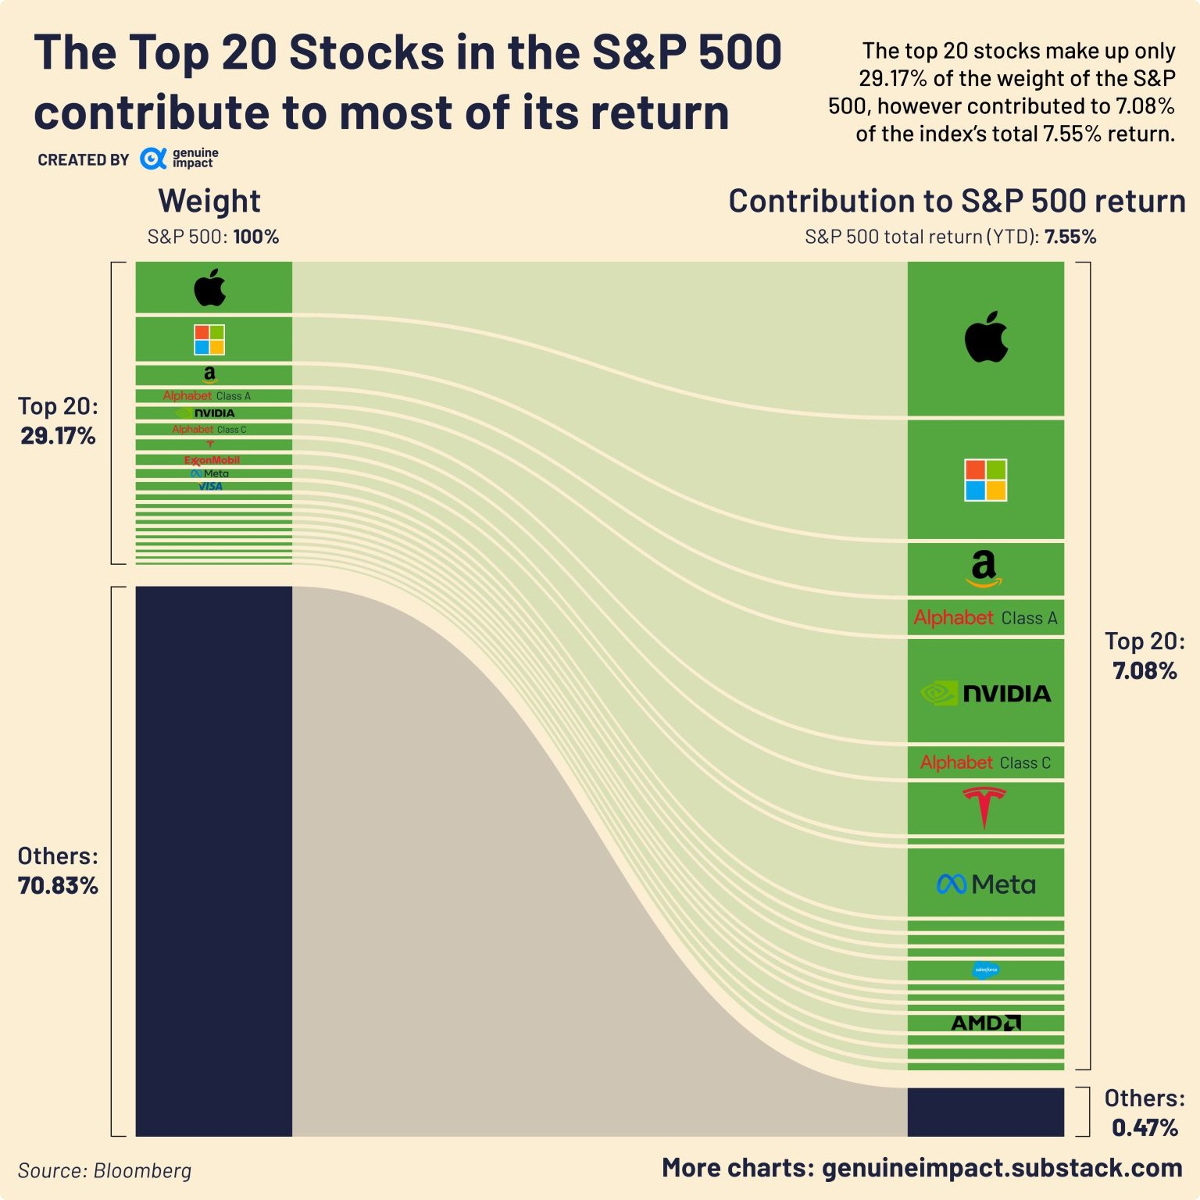 Top 20 Stocks Drive Most of S&P 500 Returns